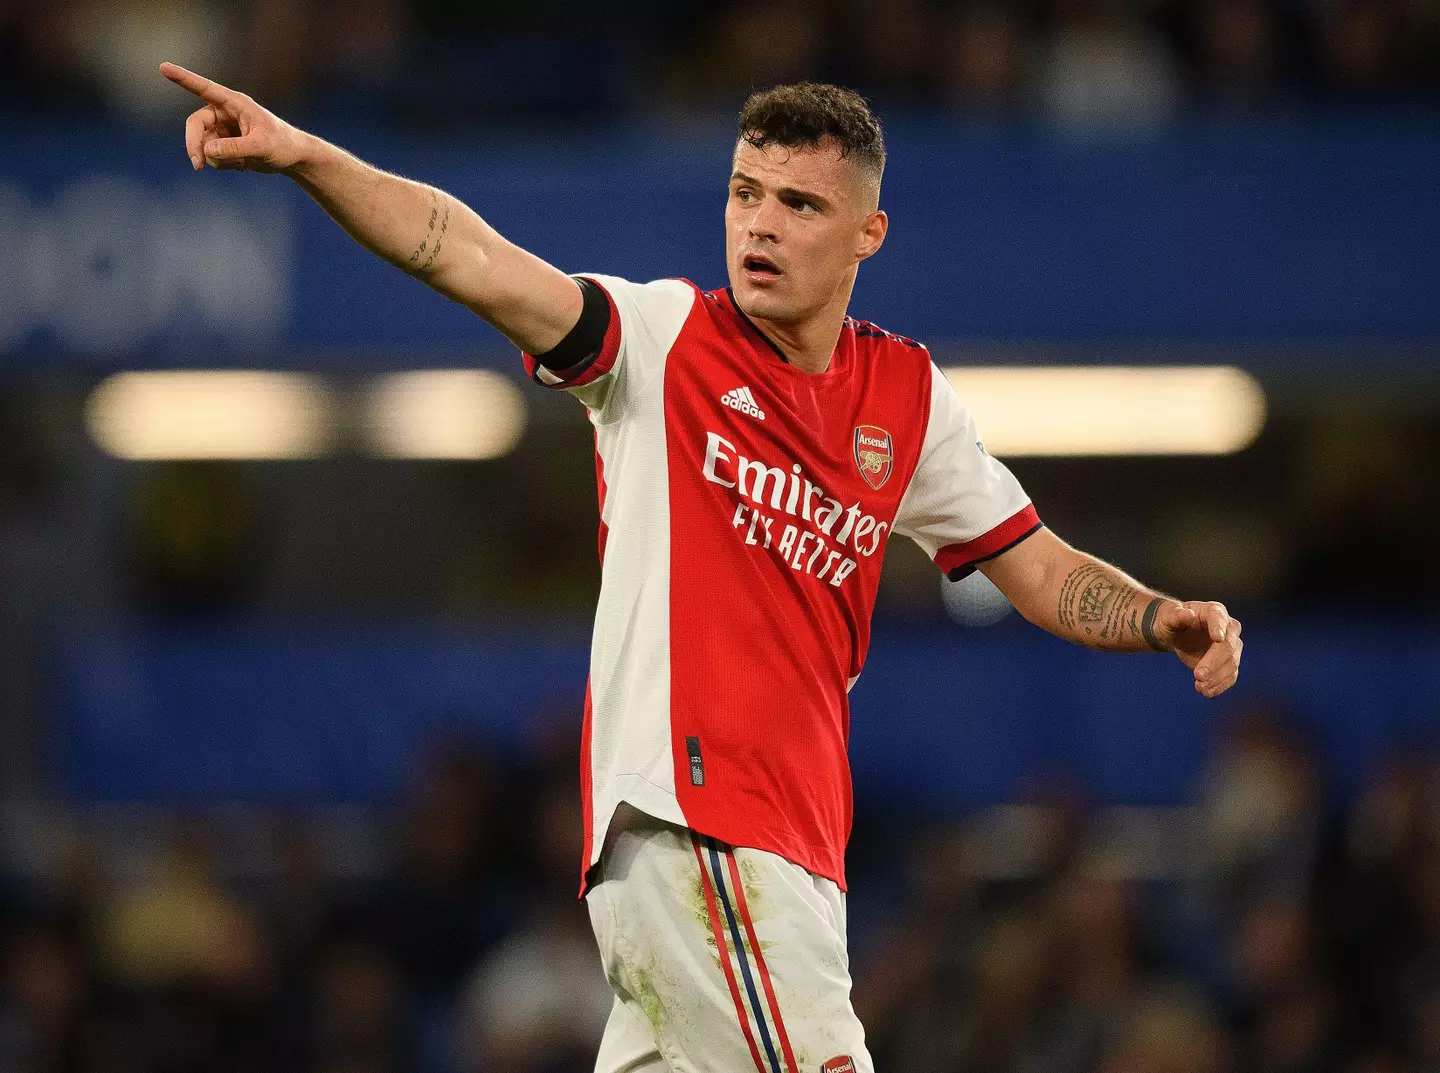 Xhaka has been a polarising figure but is one of Arsenal's more senior players